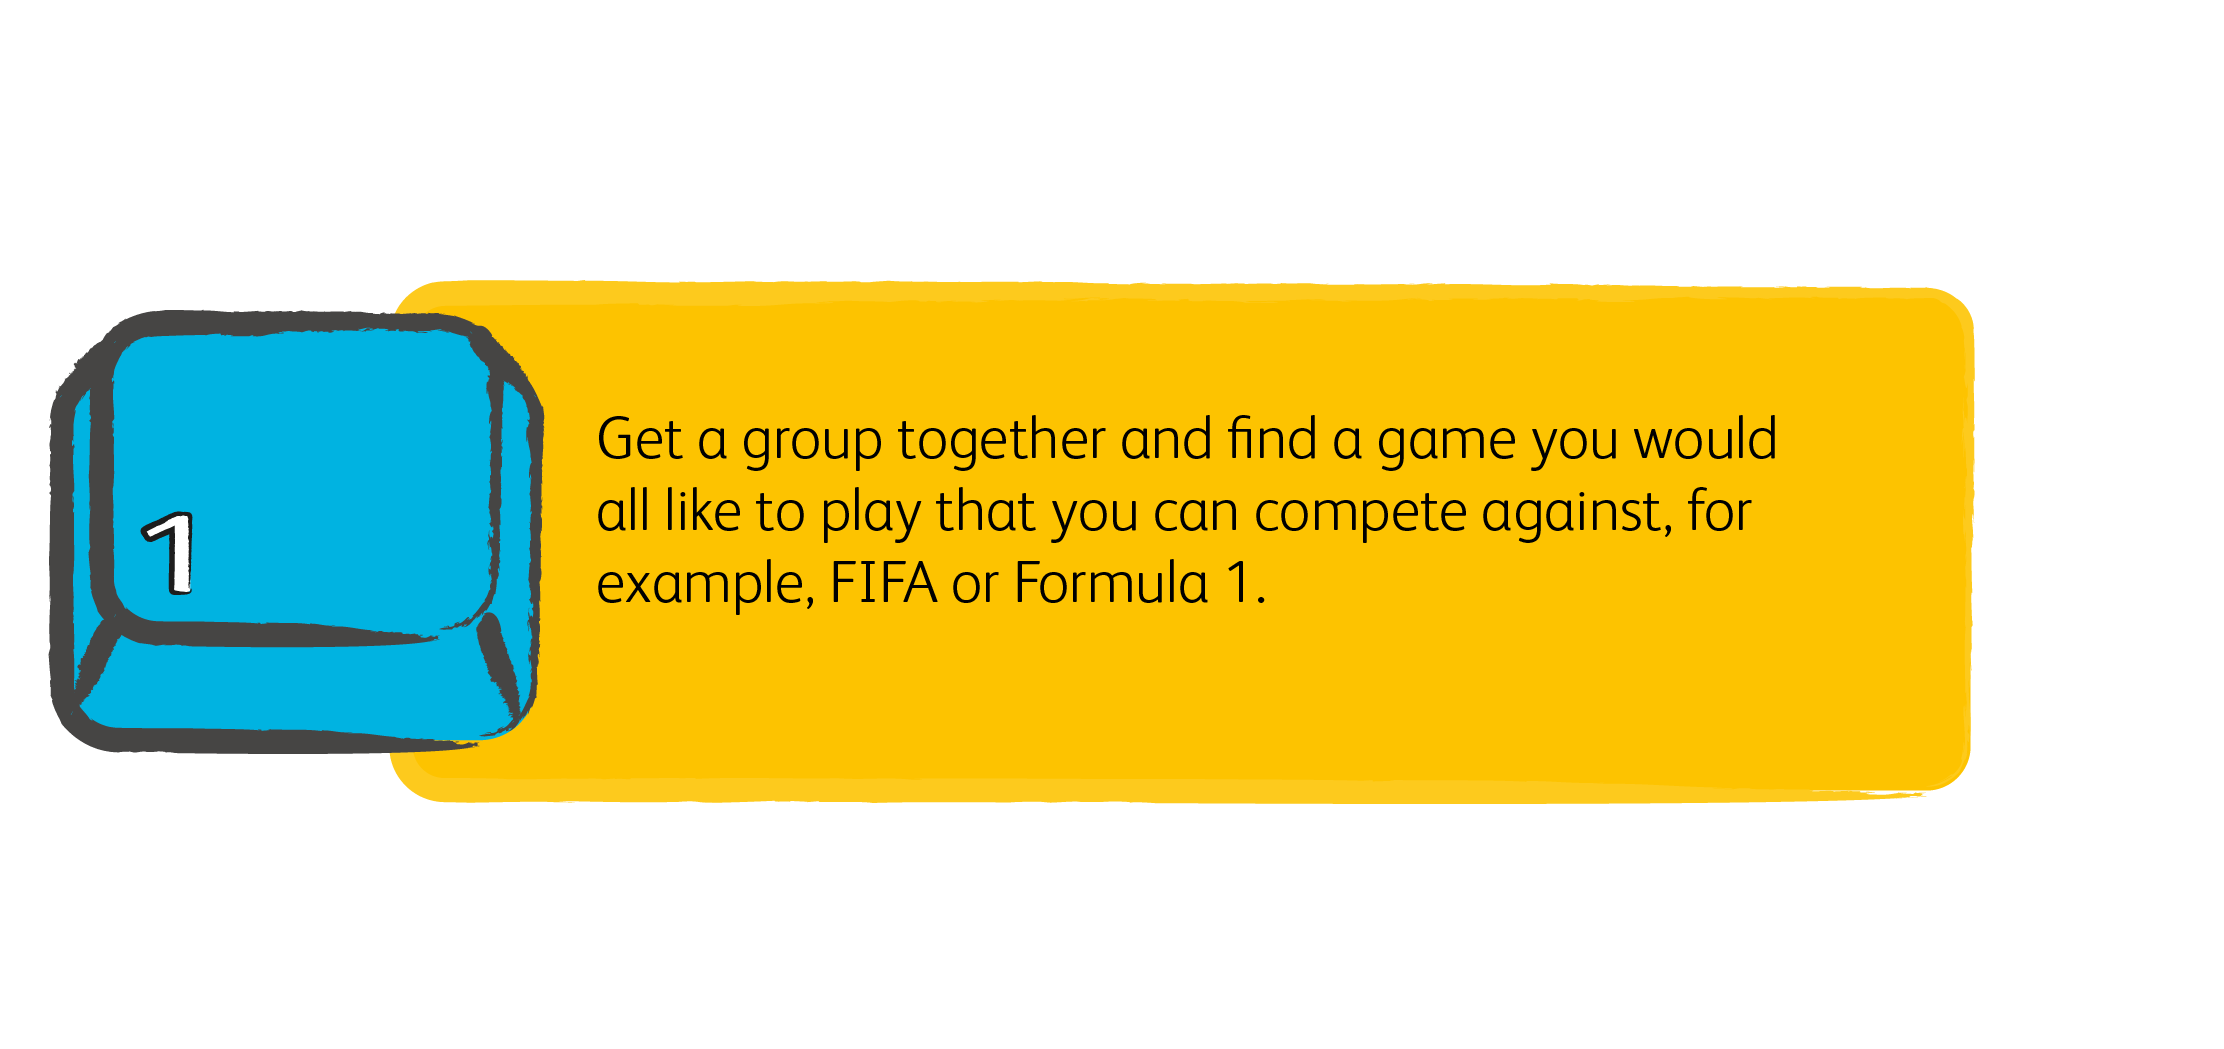 Get a group together and find a game you would all like to play that you can compete against, for example, FIFA or Formula 1